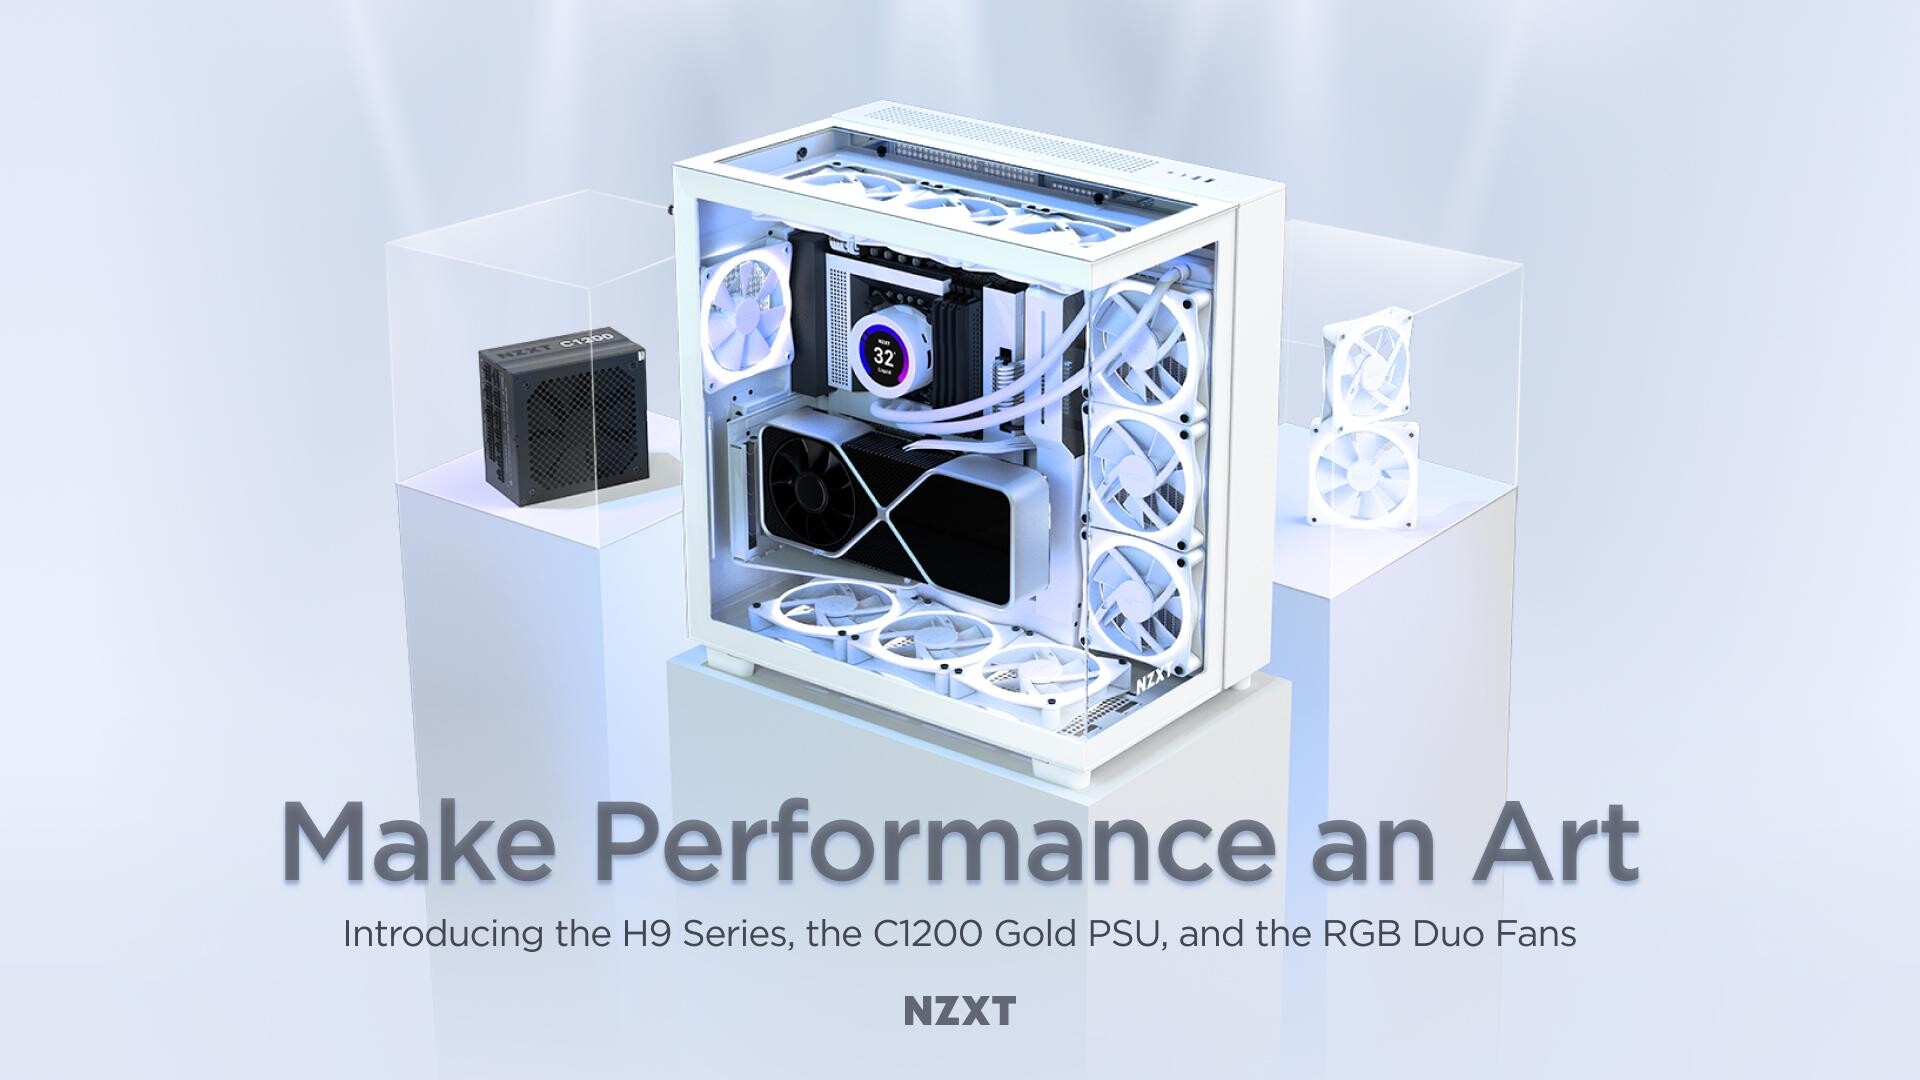 NZXT Announces H9 Series ATX Cases, C1200 PSU, and Duo RGB Fan